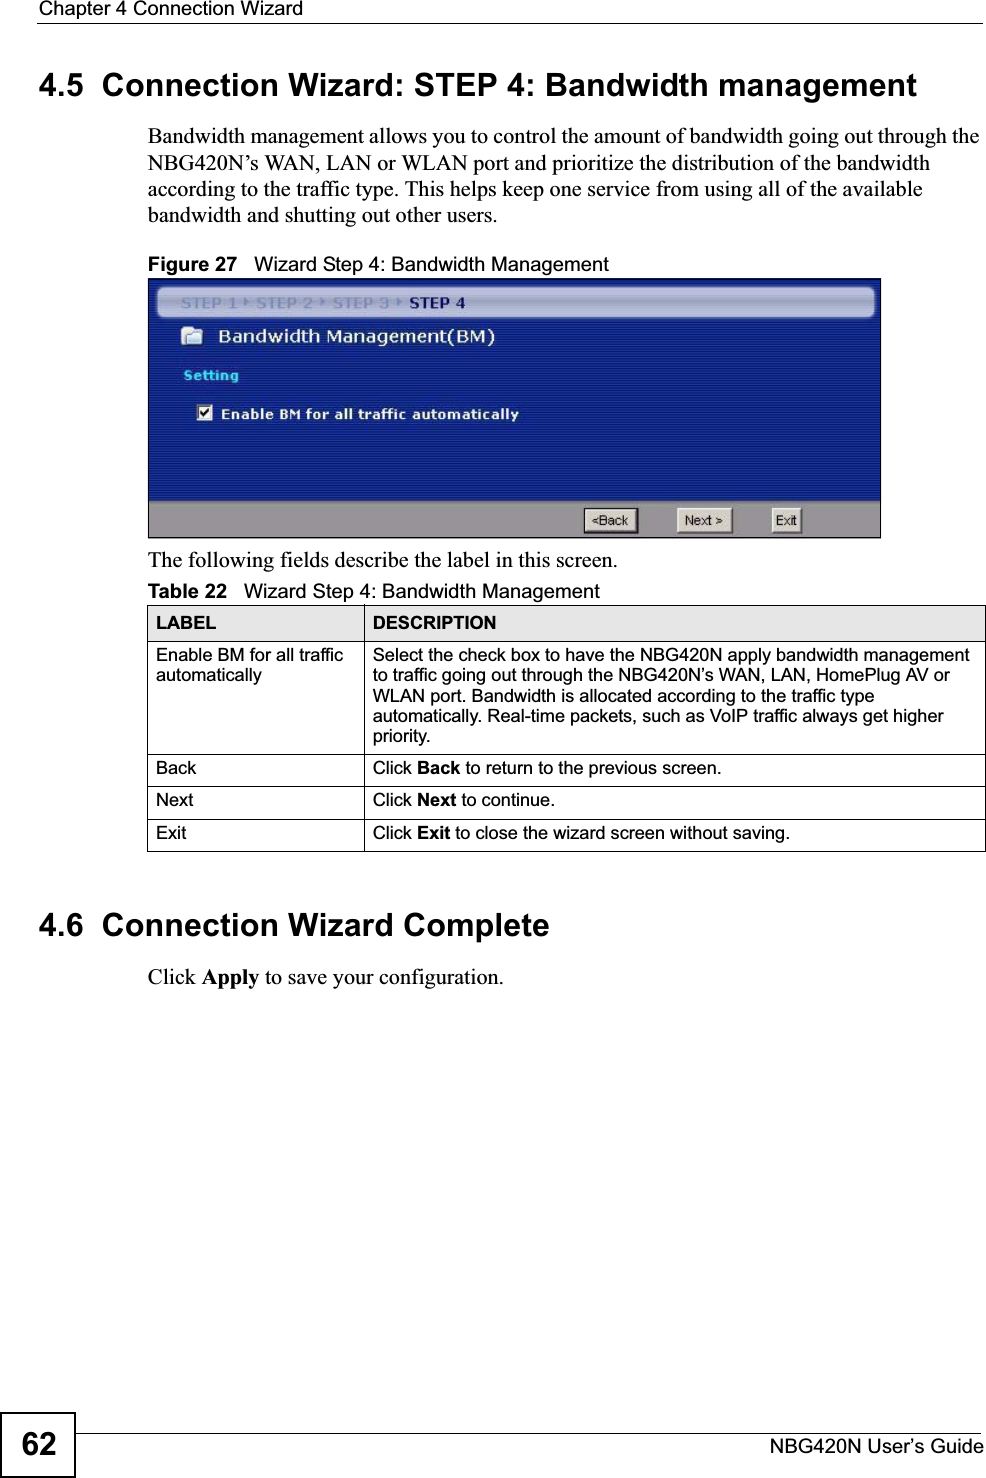 Chapter 4 Connection WizardNBG420N User’s Guide624.5  Connection Wizard: STEP 4: Bandwidth managementBandwidth management allows you to control the amount of bandwidth going out through the NBG420N’s WAN, LAN or WLAN port and prioritize the distribution of the bandwidth according to the traffic type. This helps keep one service from using all of the available bandwidth and shutting out other users.Figure 27   Wizard Step 4: Bandwidth Management The following fields describe the label in this screen.4.6  Connection Wizard CompleteClick Apply to save your configuration.Table 22   Wizard Step 4: Bandwidth ManagementLABEL DESCRIPTIONEnable BM for all traffic automaticallySelect the check box to have the NBG420N apply bandwidth management to traffic going out through the NBG420N’s WAN, LAN, HomePlug AV or WLAN port. Bandwidth is allocated according to the traffic type automatically. Real-time packets, such as VoIP traffic always get higher priority.Back Click Back to return to the previous screen.Next Click Next to continue. Exit Click Exit to close the wizard screen without saving.